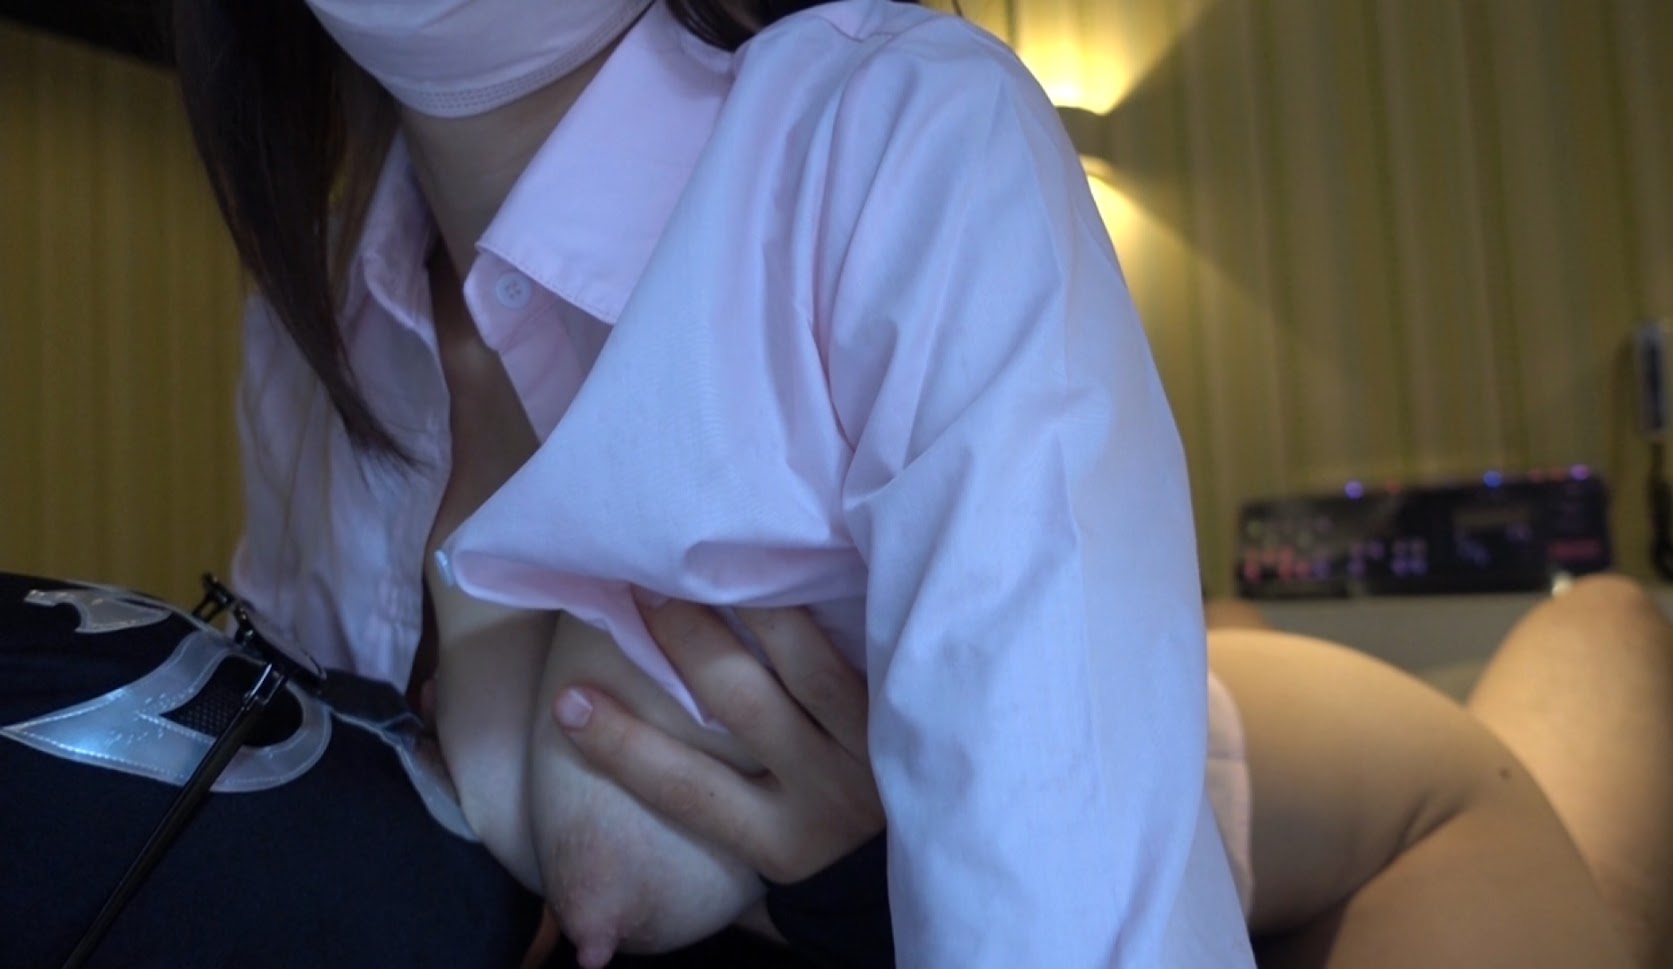 Ria chan Constriction on the ultimate thin waist Gonzo with uniform costume Ecchi handjob launch [FC2-PPV 2368488]